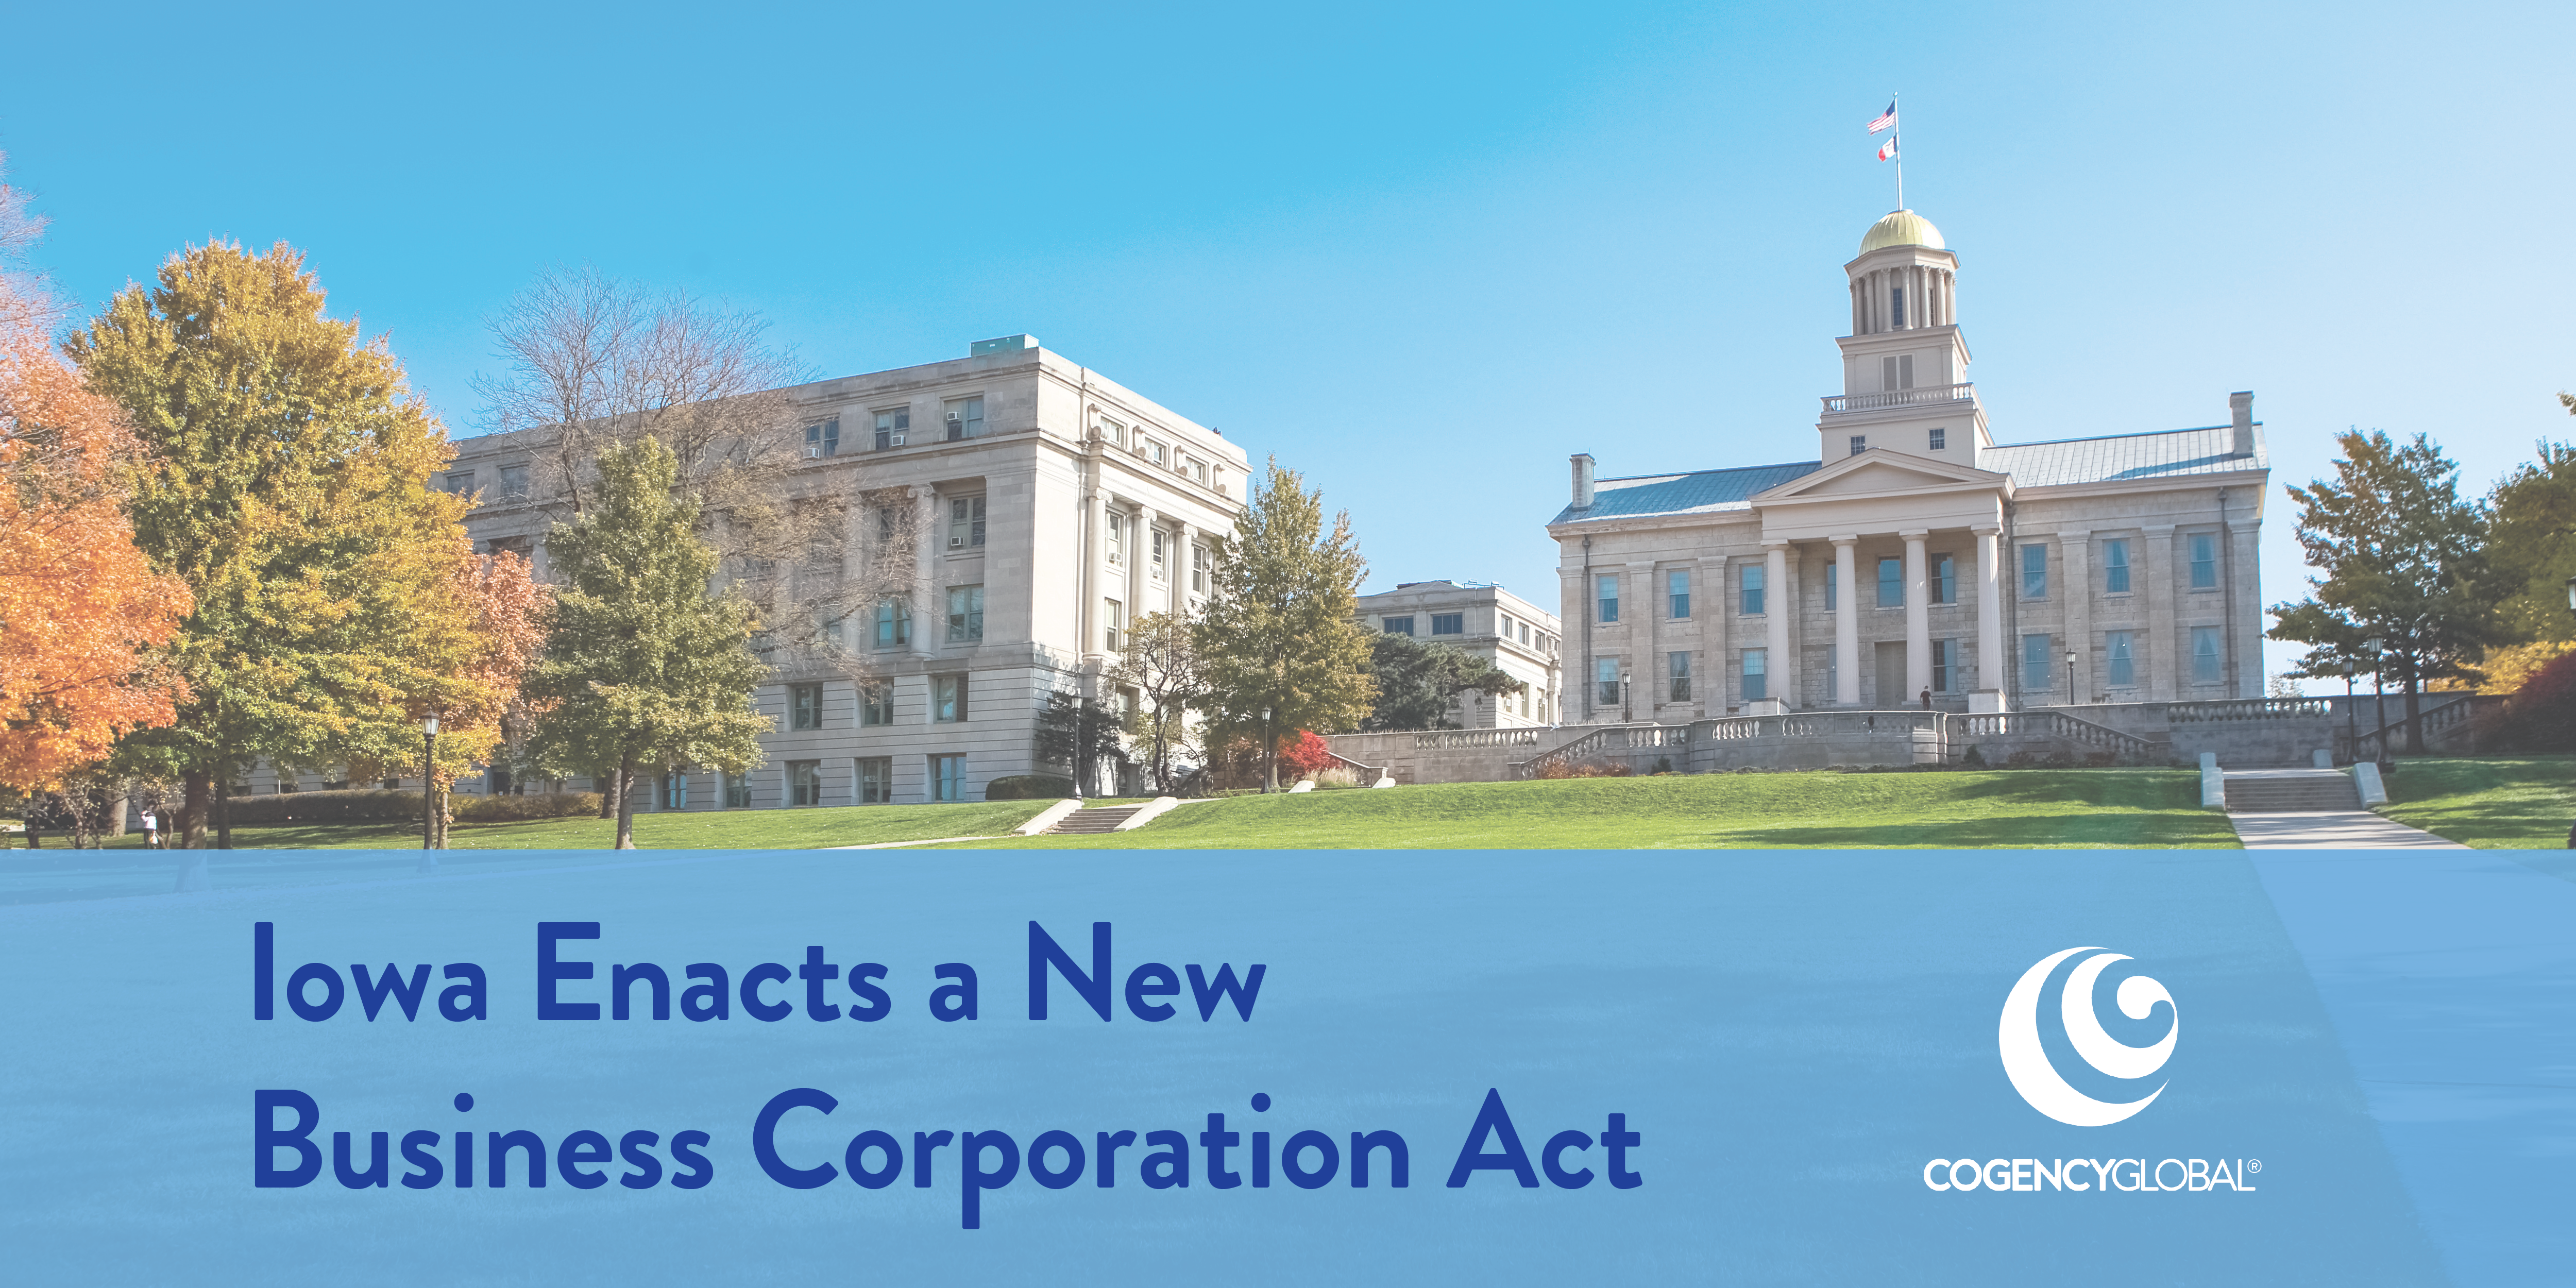 Iowa Enacts a New Business Corporation Act